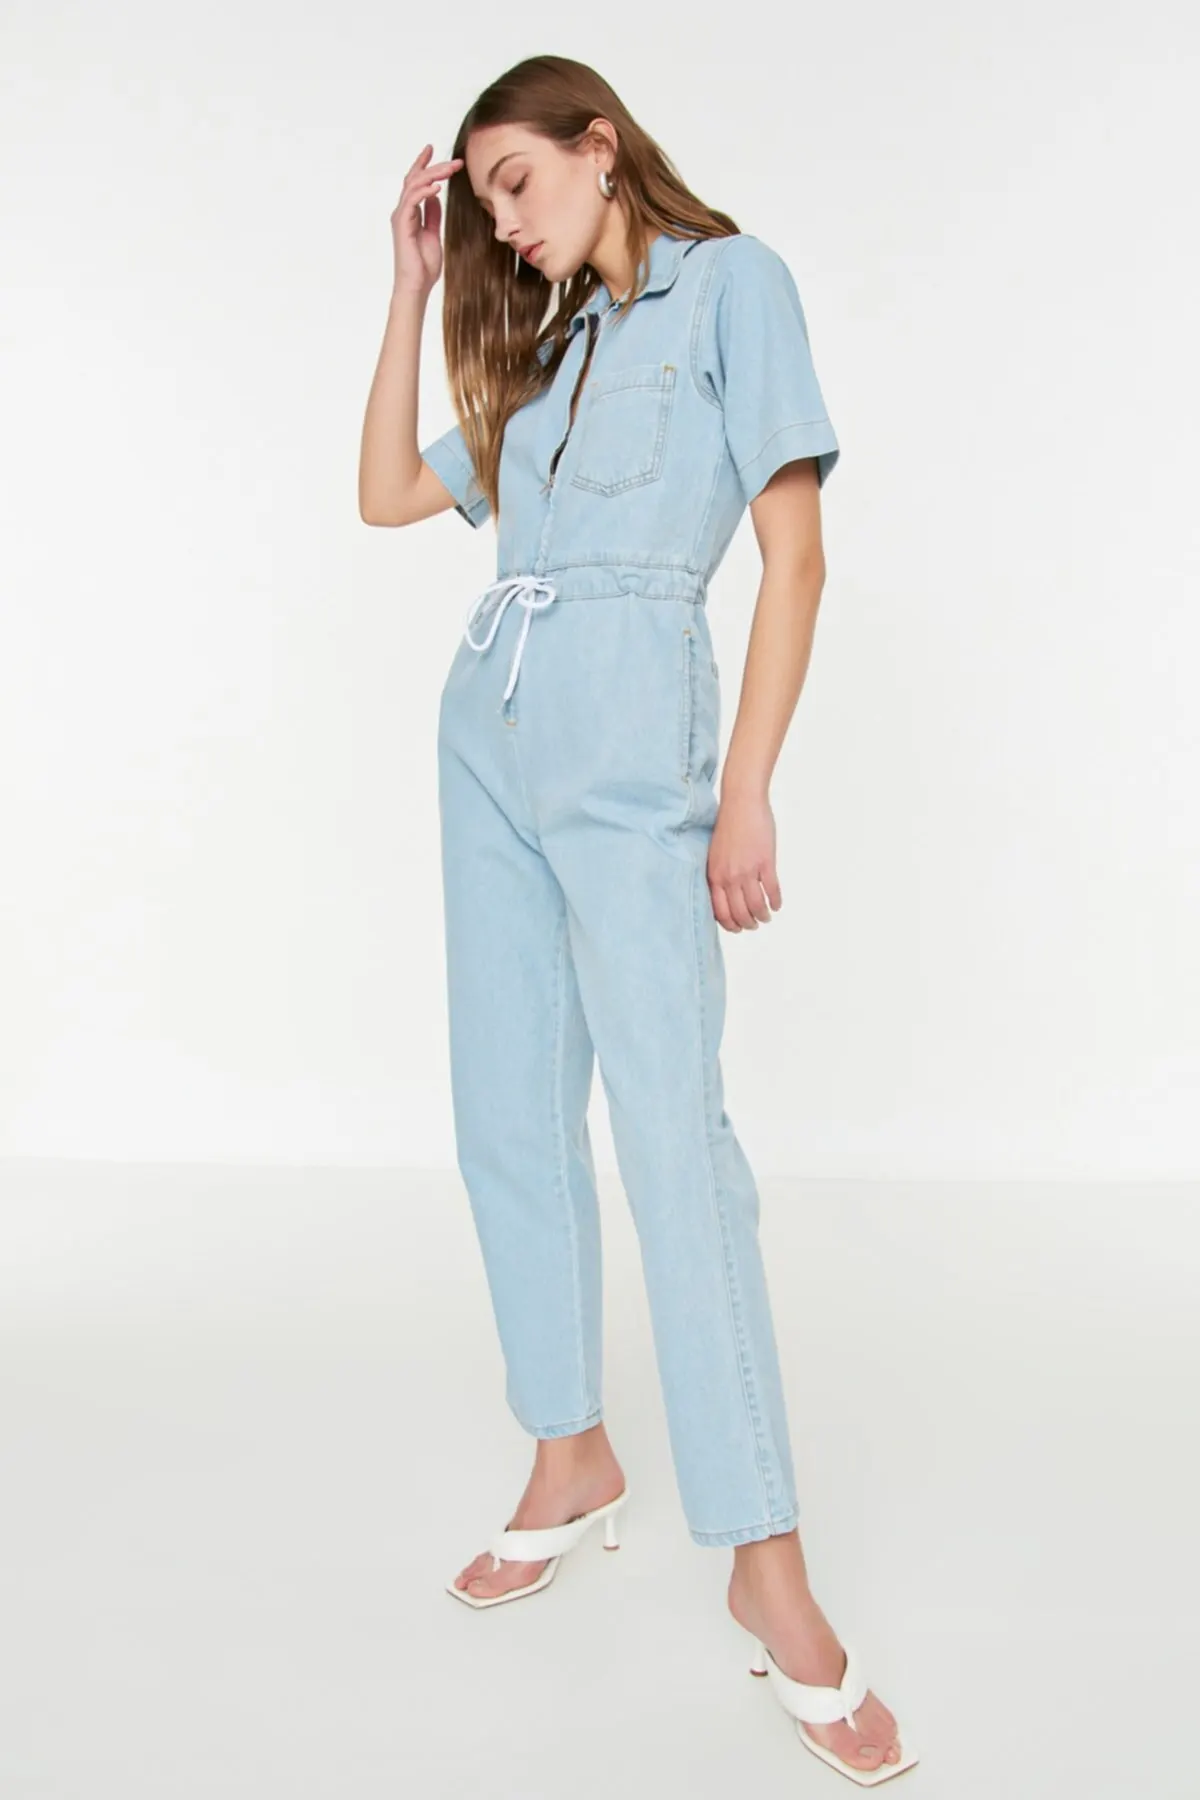 

Women's Overalls Light Blue Tie Detailed Denim Hot Style Quality Fabric Sleeveless Baggy Trousers Casual Jumpsuit